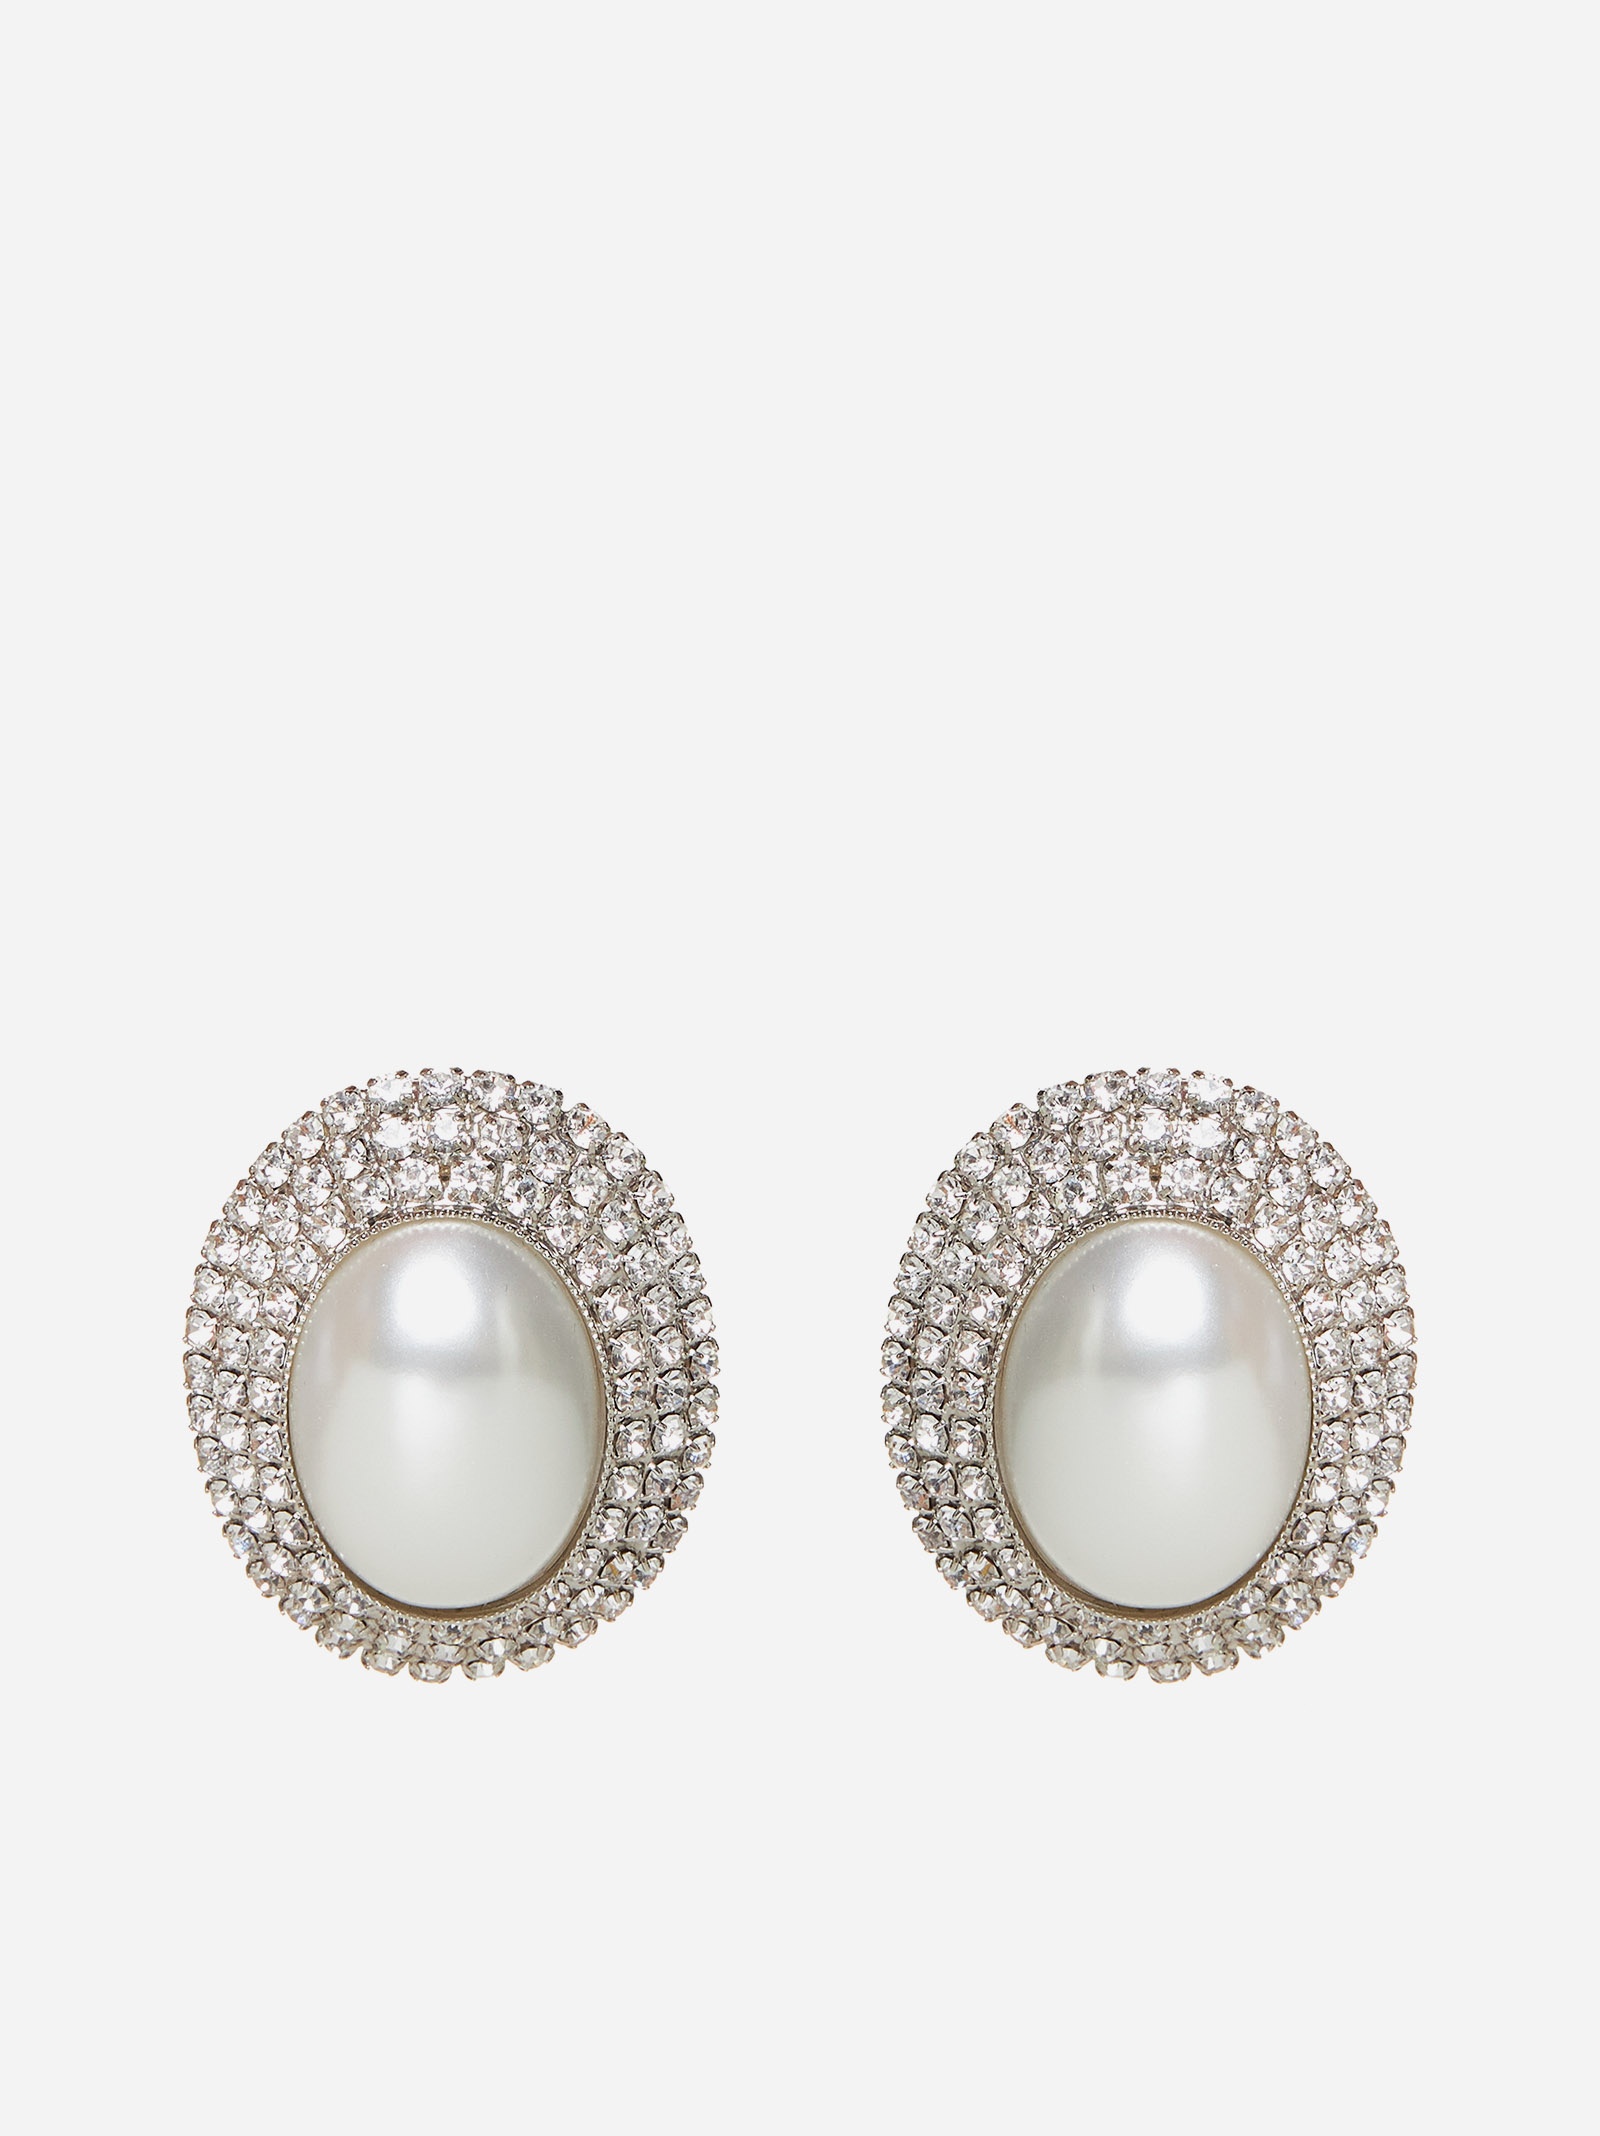 Oval crystals and pearl earrings - 1